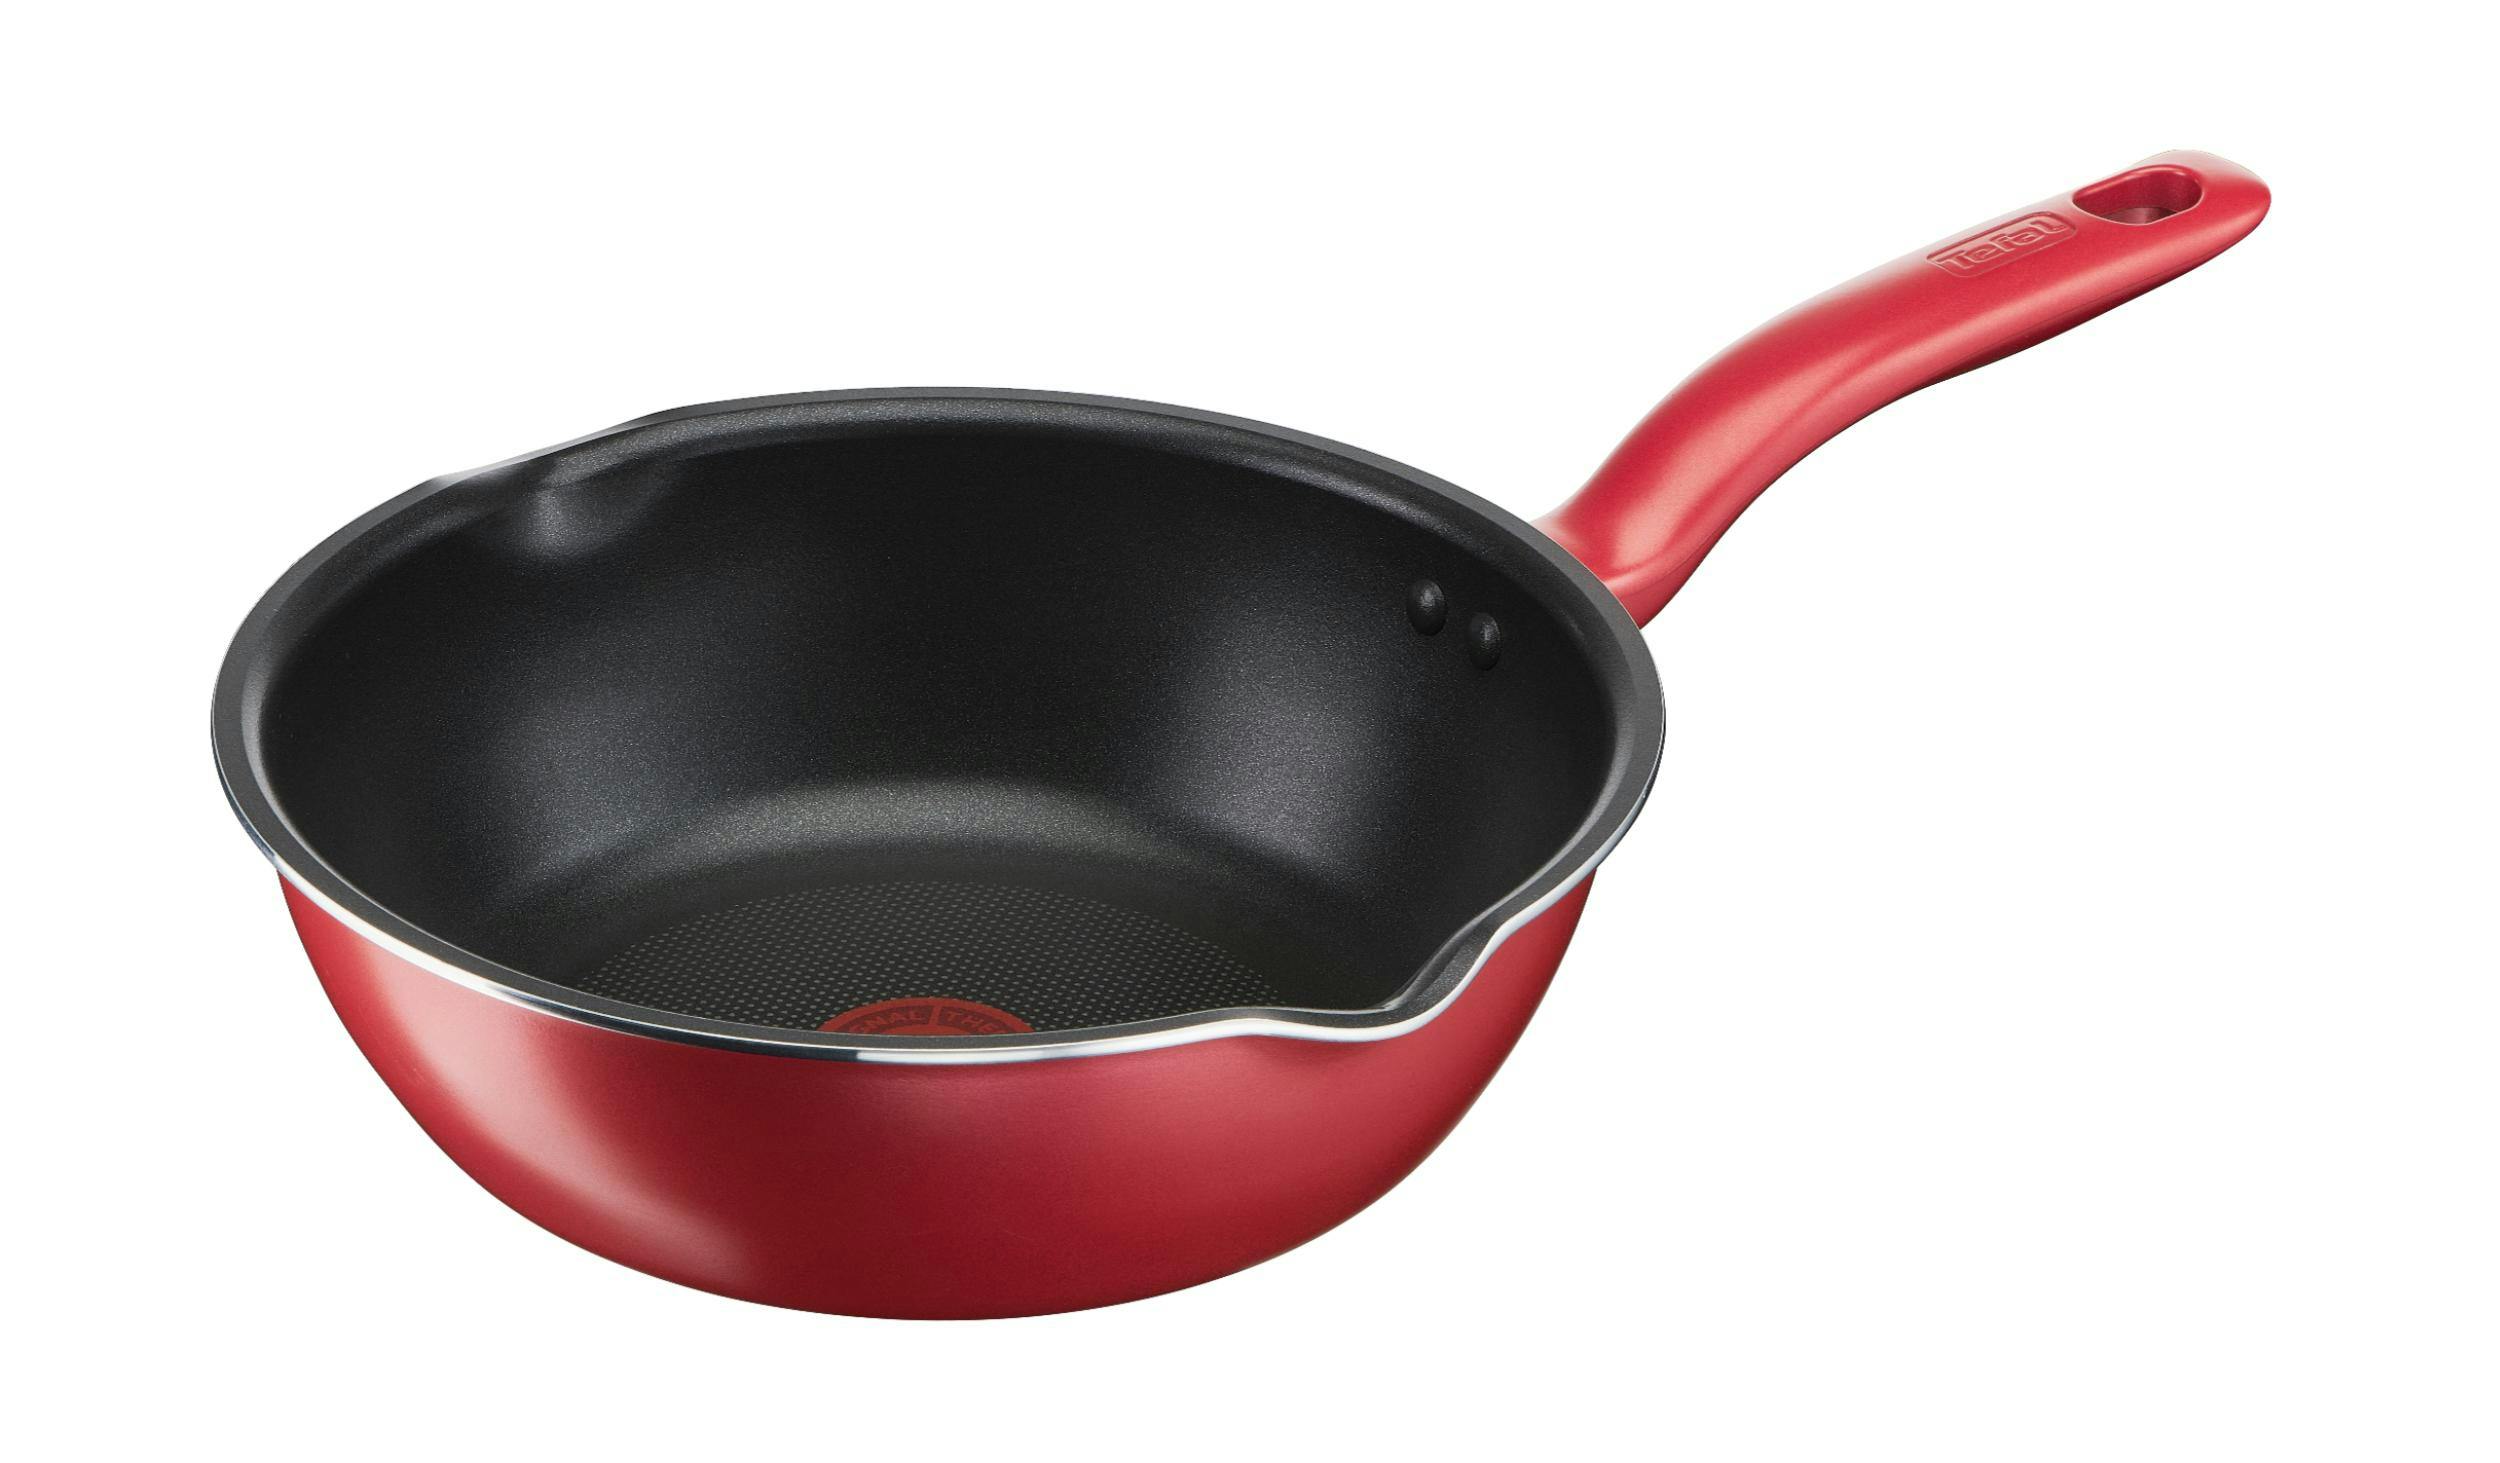 https://hnsgsfp.imgix.net/9/images/detailed/95/tefal-so-chef-deep-frypan-28cm-g1358696.jpg?fit=fill&bg=0FFF&w=2500&h=1463&auto=format,compress